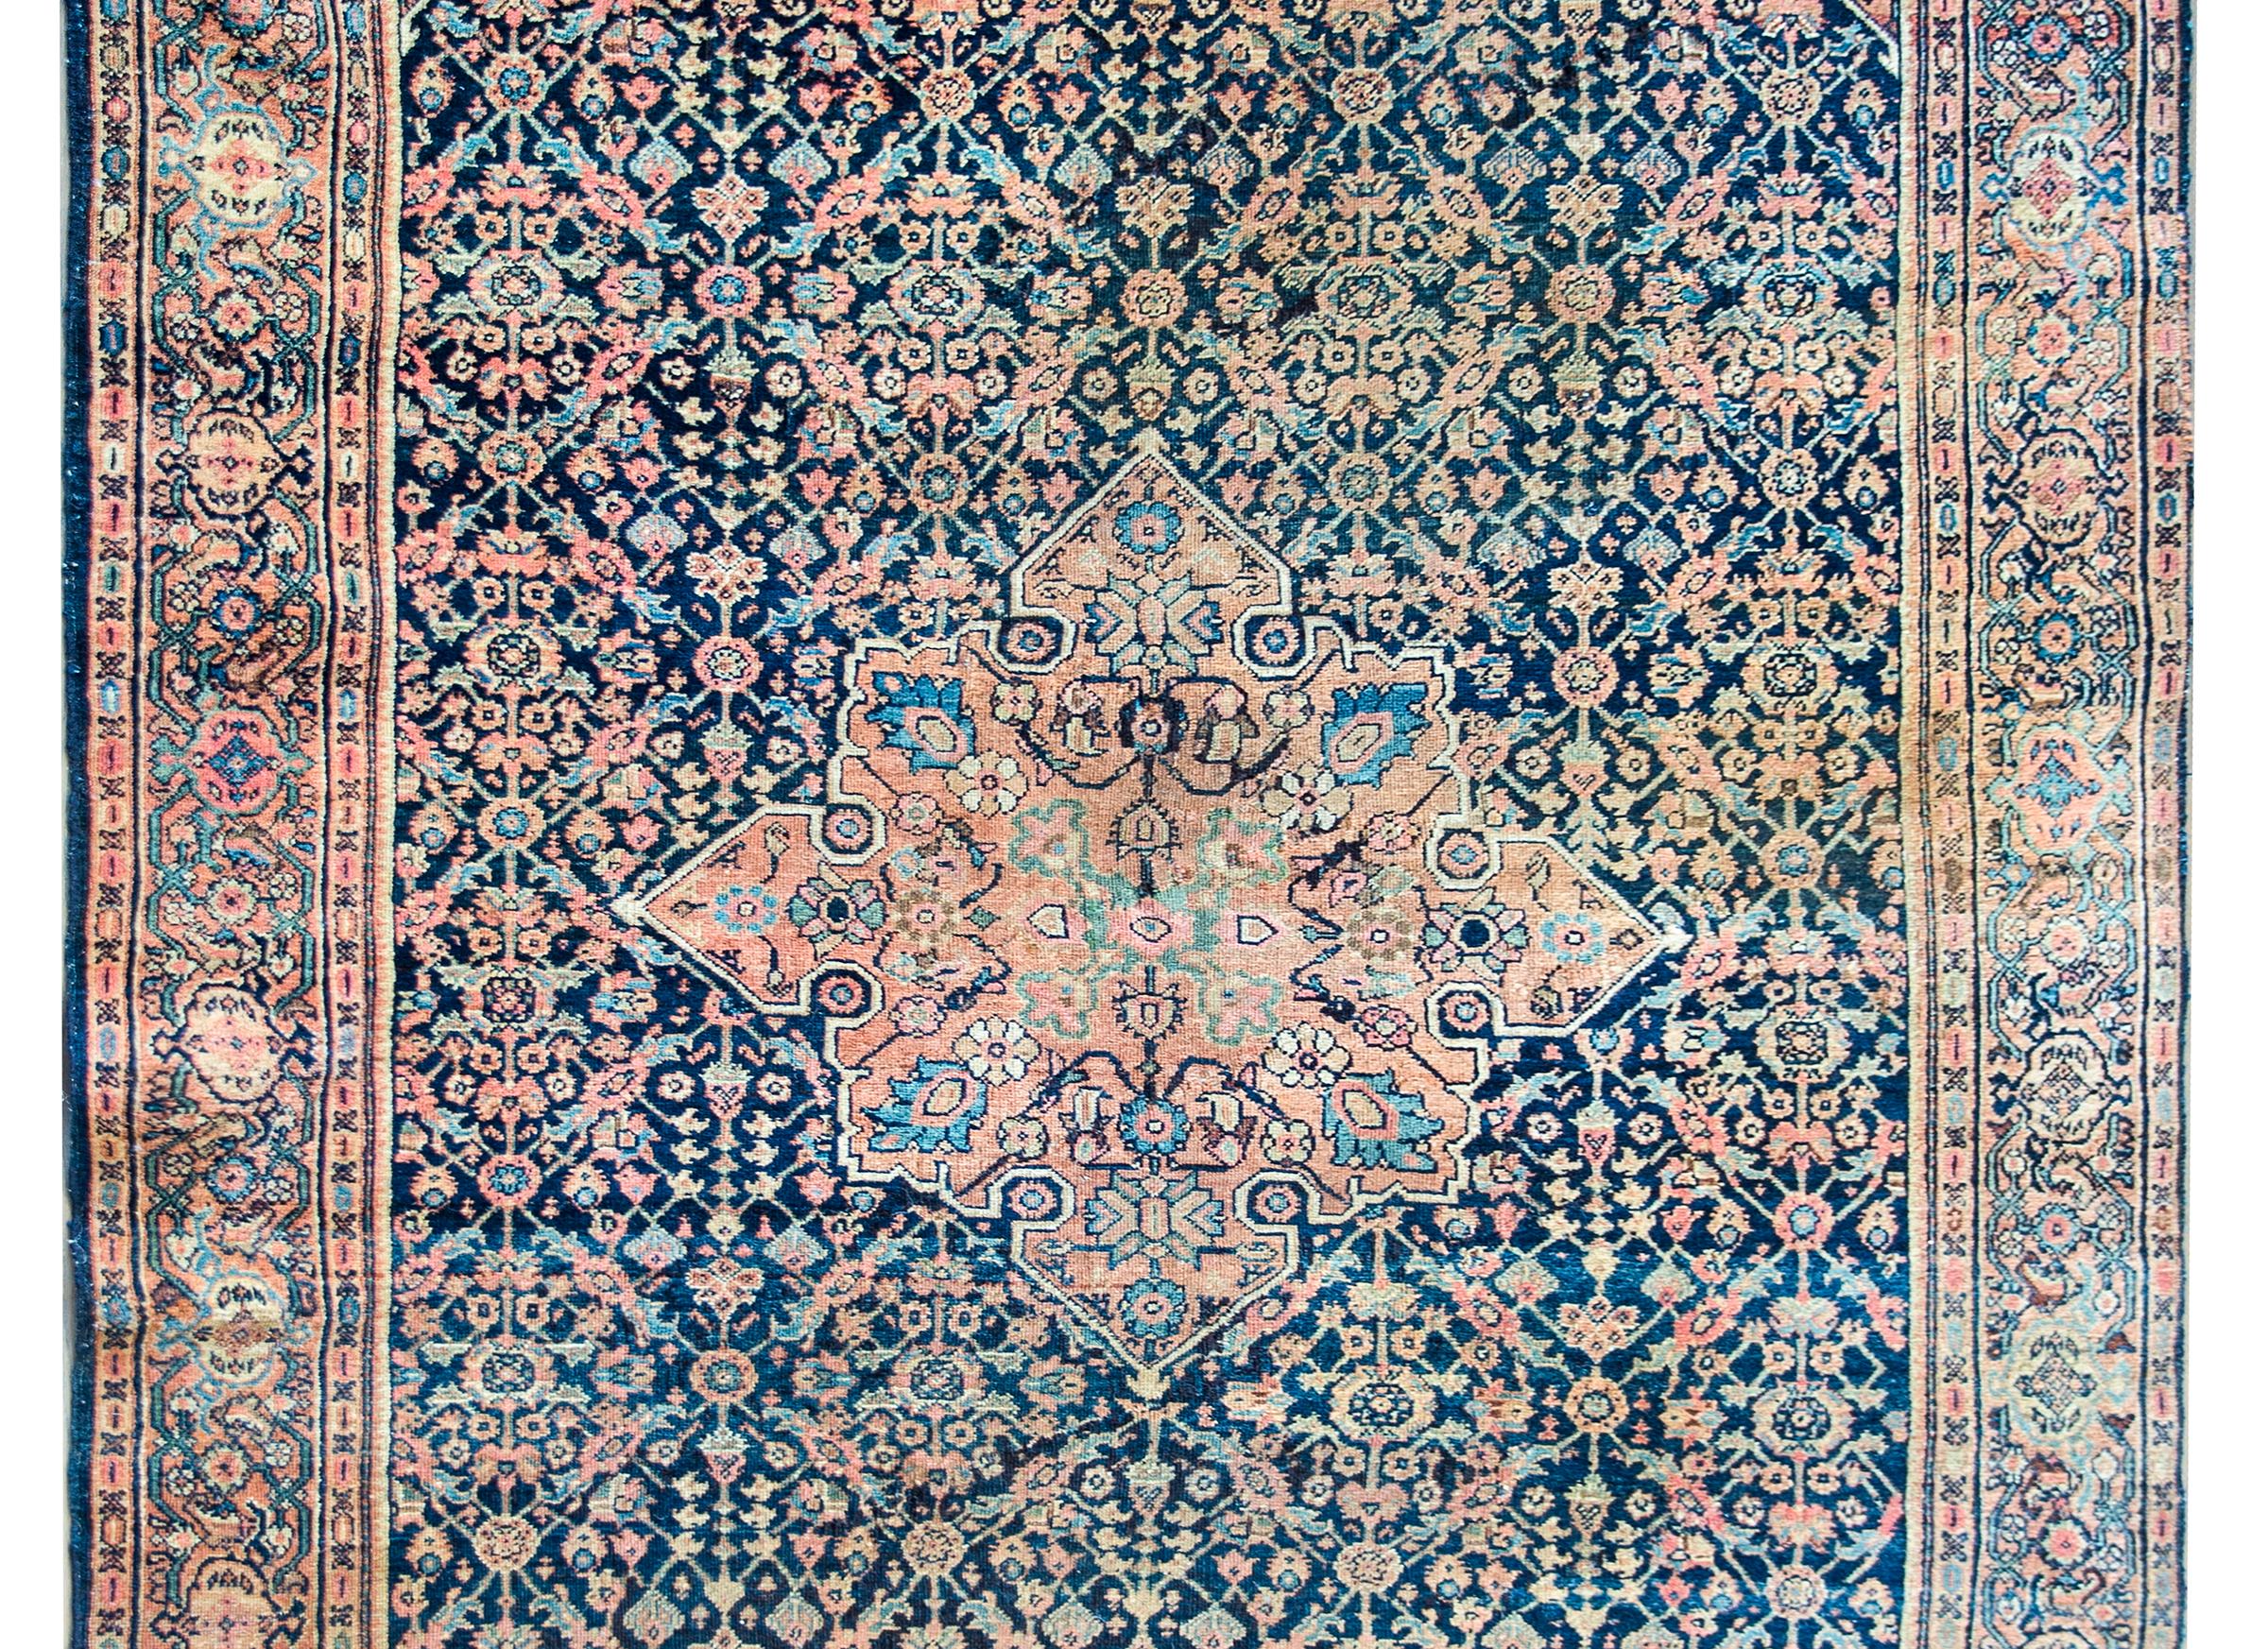 A remarkable early 20th century Persian Farahan rug with a traditional Herati pattern containing a large central floral medallion living amidst a floral trellis pattern background with myriad flowers and leaves, and all woven in salmon, indigo,